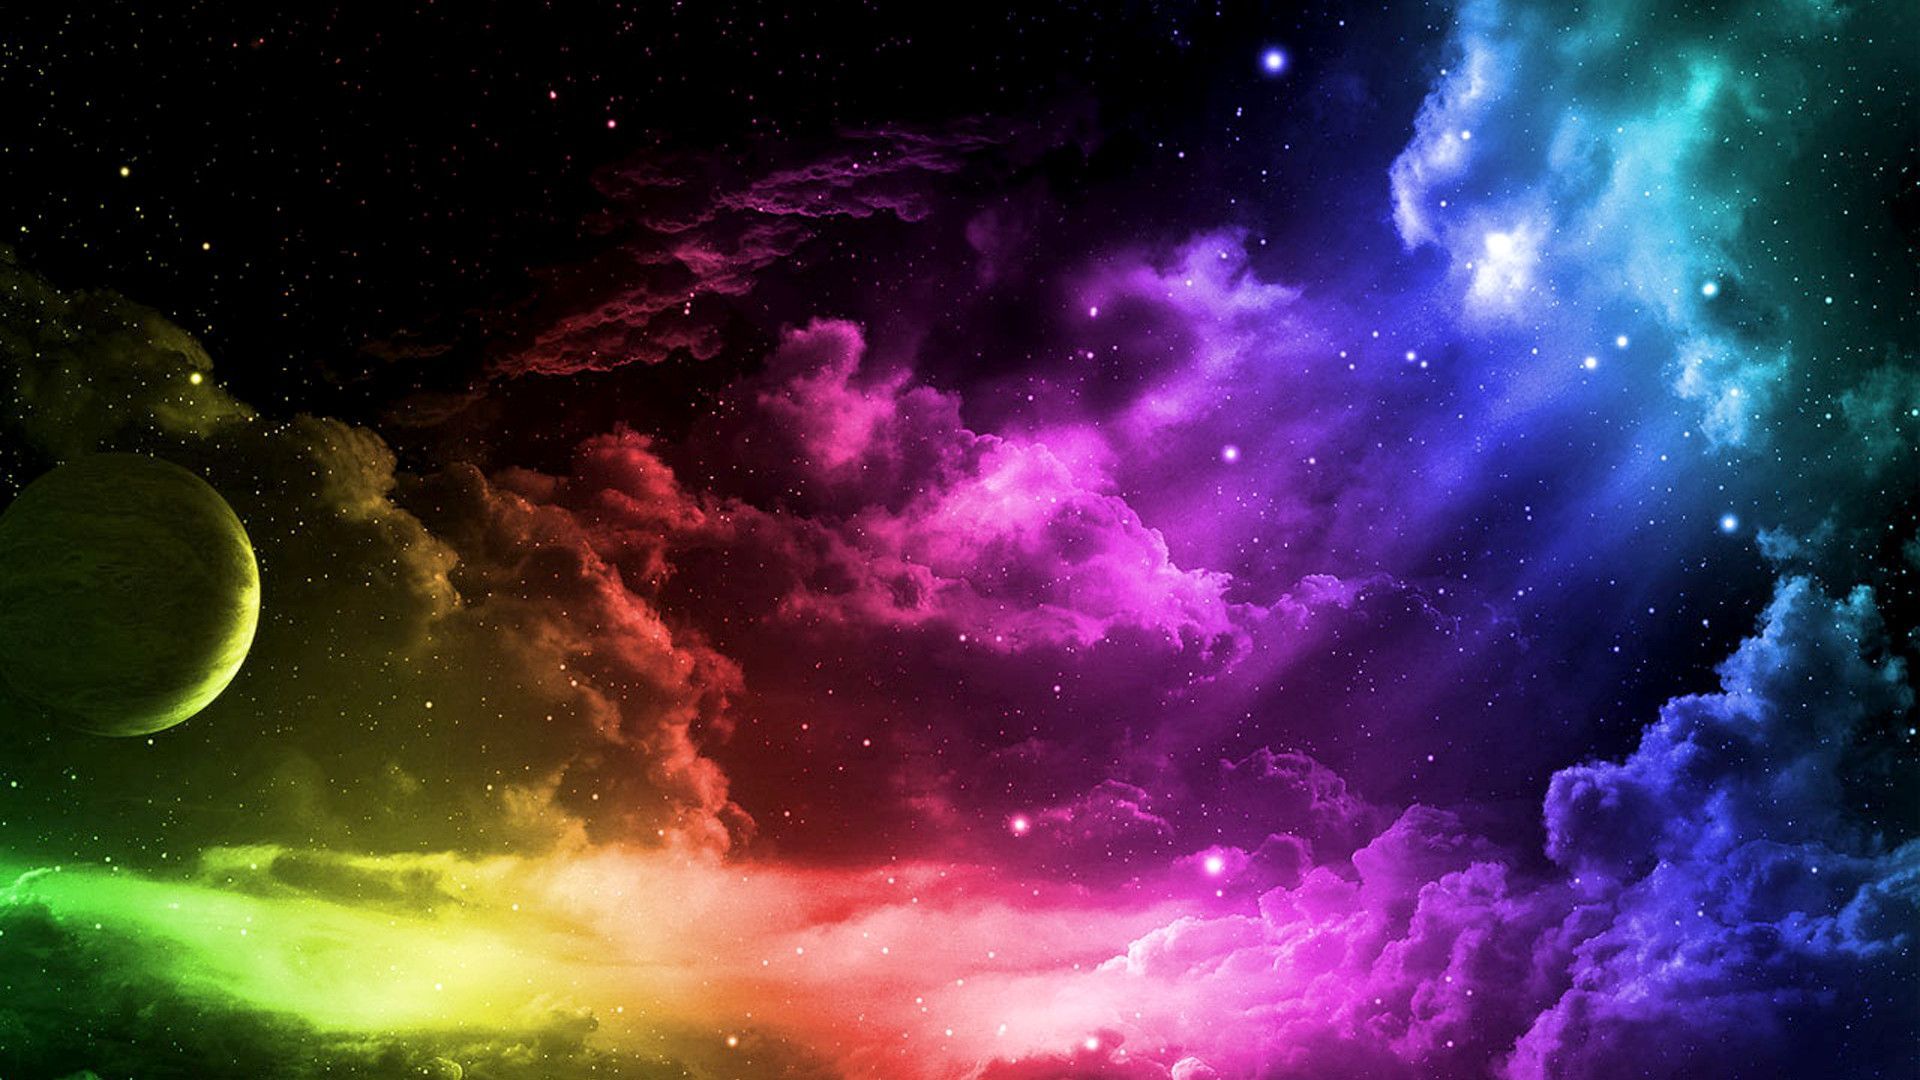 Desktop Background Computer Freewares Sky, Full HD desktop wallpaper. Rainbow wallpaper, Background picture, Colorful background